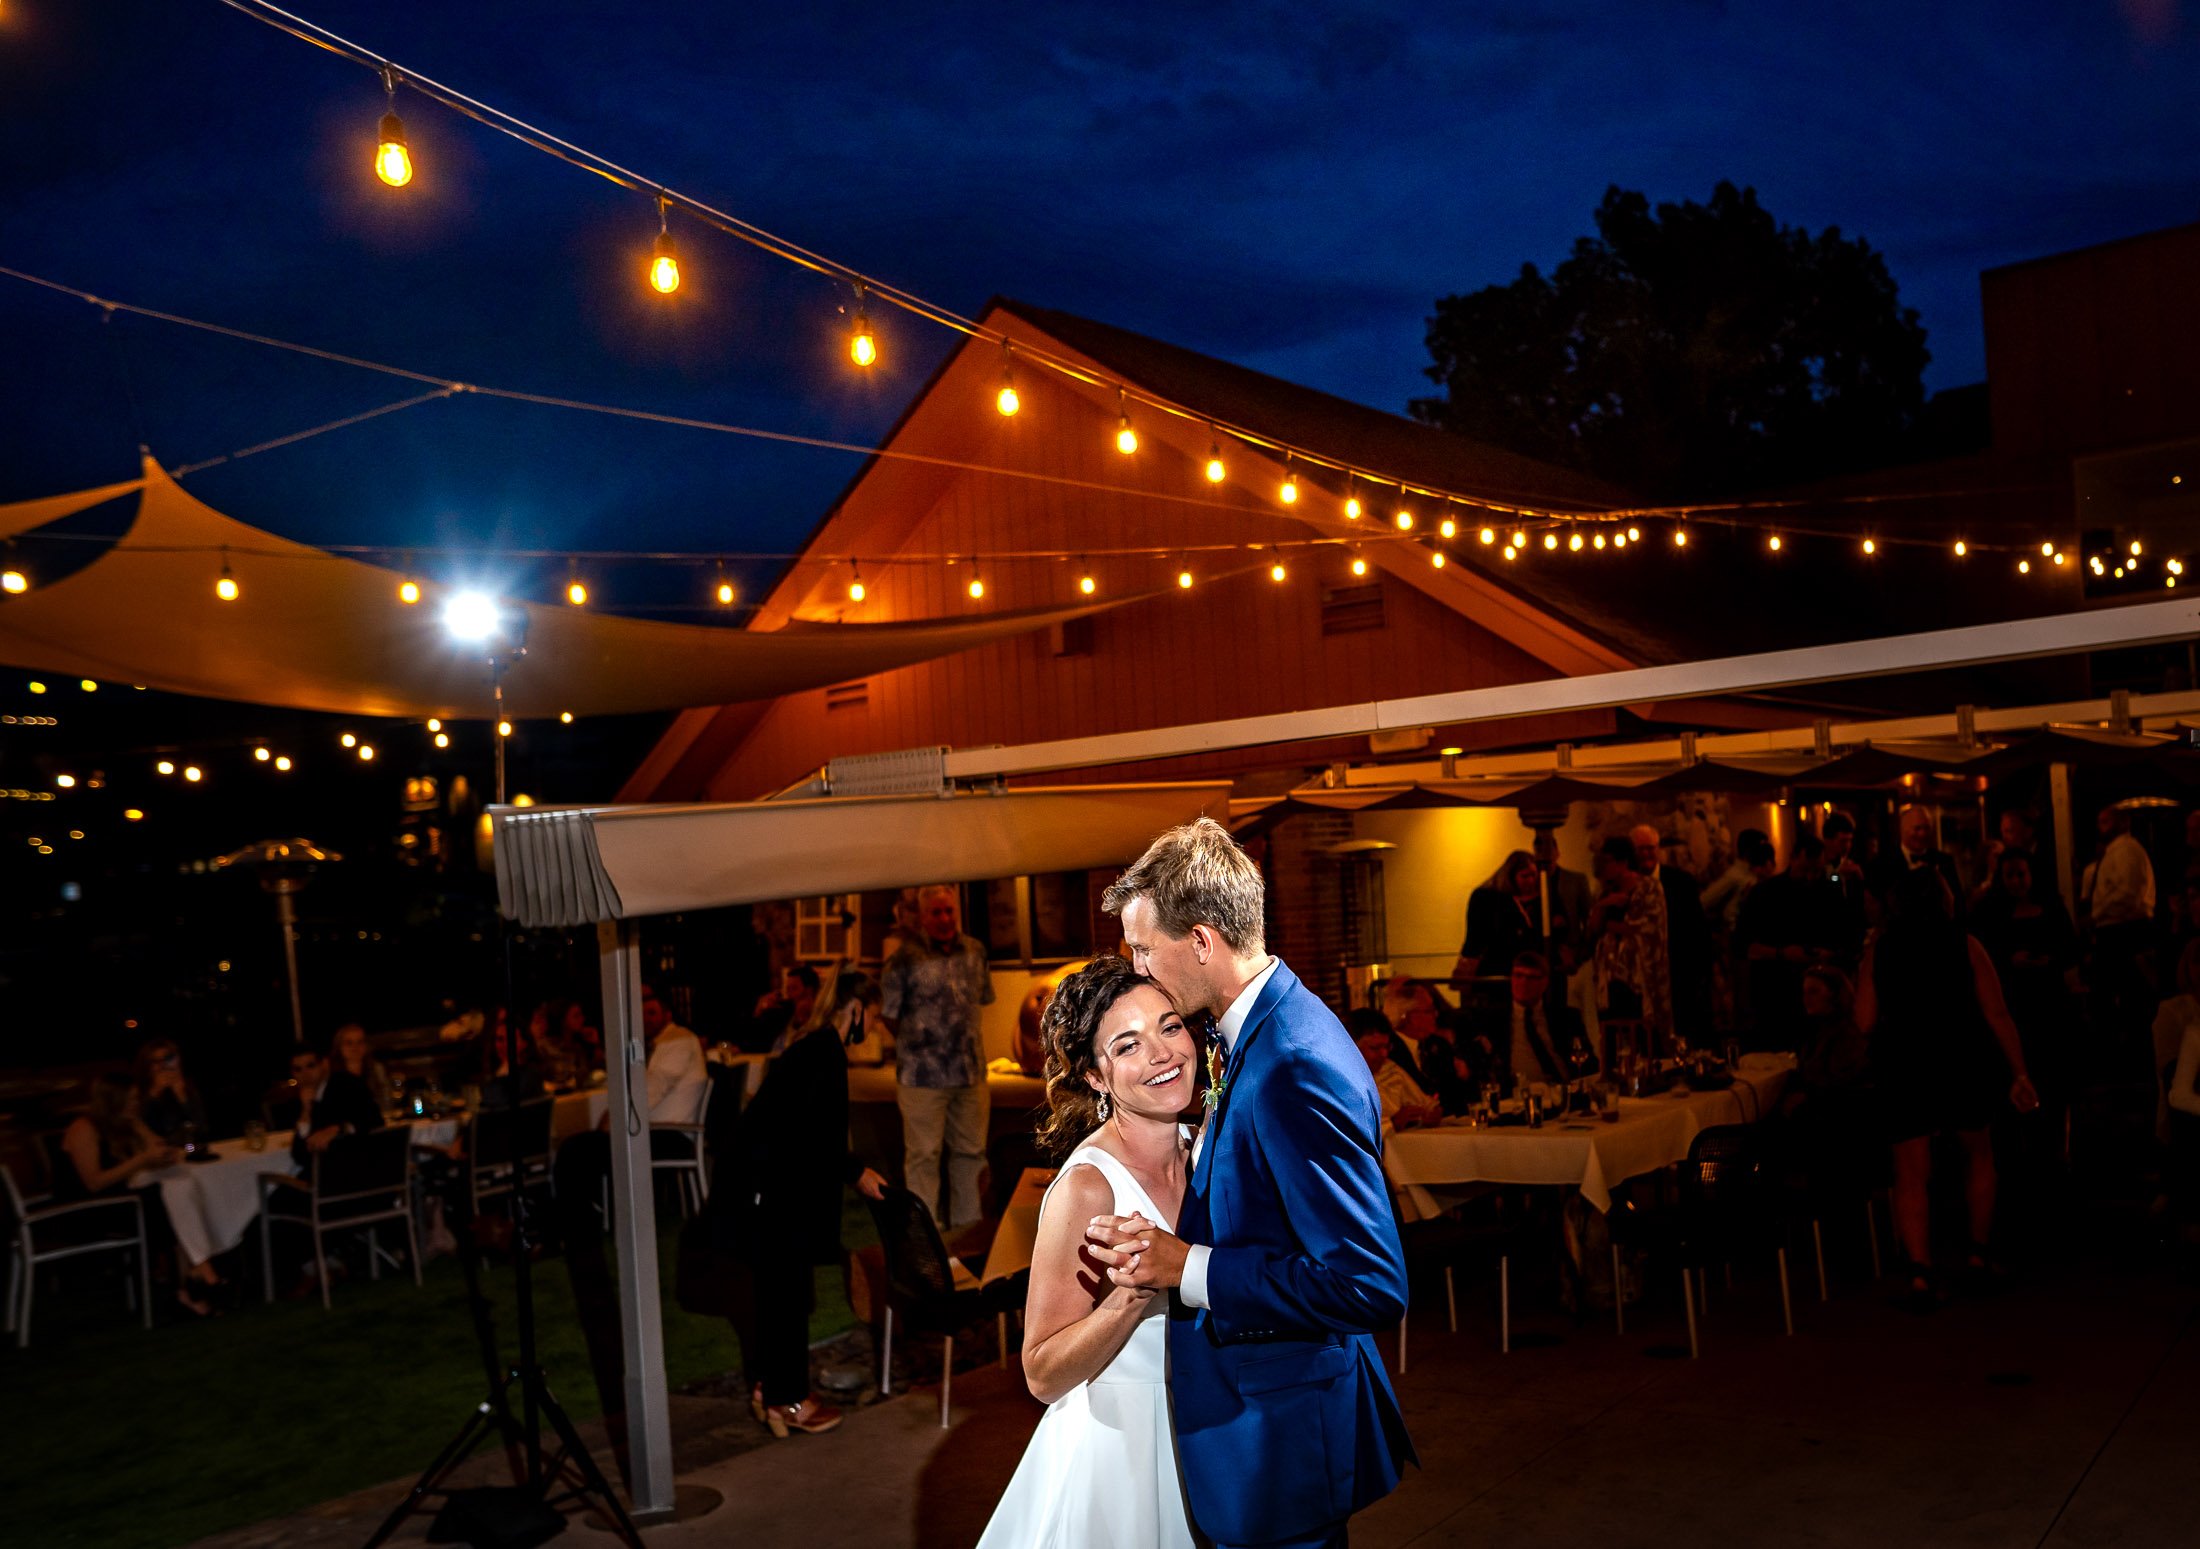 Bride and groom share their first dance on the outdoor patio under cafe lights at blue hour during their wedding reception, wedding, wedding photos, wedding photography, wedding photographer, wedding inspiration, wedding photo inspiration, wedding portraits, wedding ceremony, wedding reception, mountain wedding, Catholic Church wedding, Catholic Church wedding photos, Catholic Church wedding photography, Catholic Church wedding photographer, Catholic Church wedding inspiration, Catholic Church wedding venue, Steamboat Springs wedding, Steamboat Springs wedding photos, Steamboat Springs wedding photography, Steamboat Springs wedding photographer, Colorado wedding, Colorado wedding photos, Colorado wedding photography, Colorado wedding photographer, Colorado mountain wedding, Colorado wedding inspiration